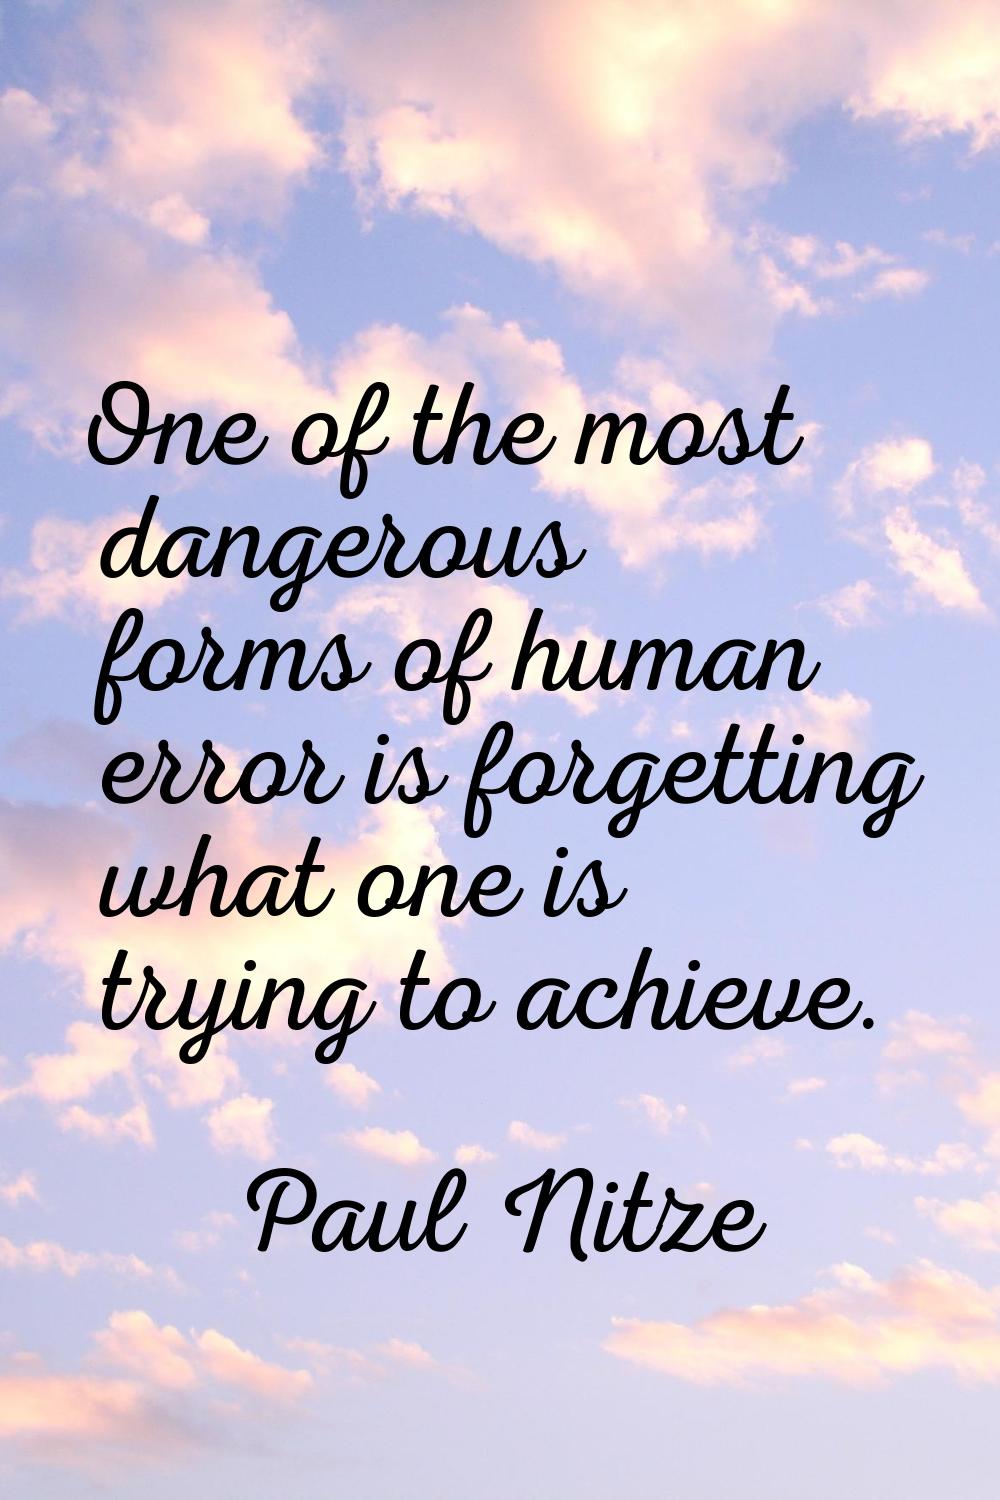 One of the most dangerous forms of human error is forgetting what one is trying to achieve.